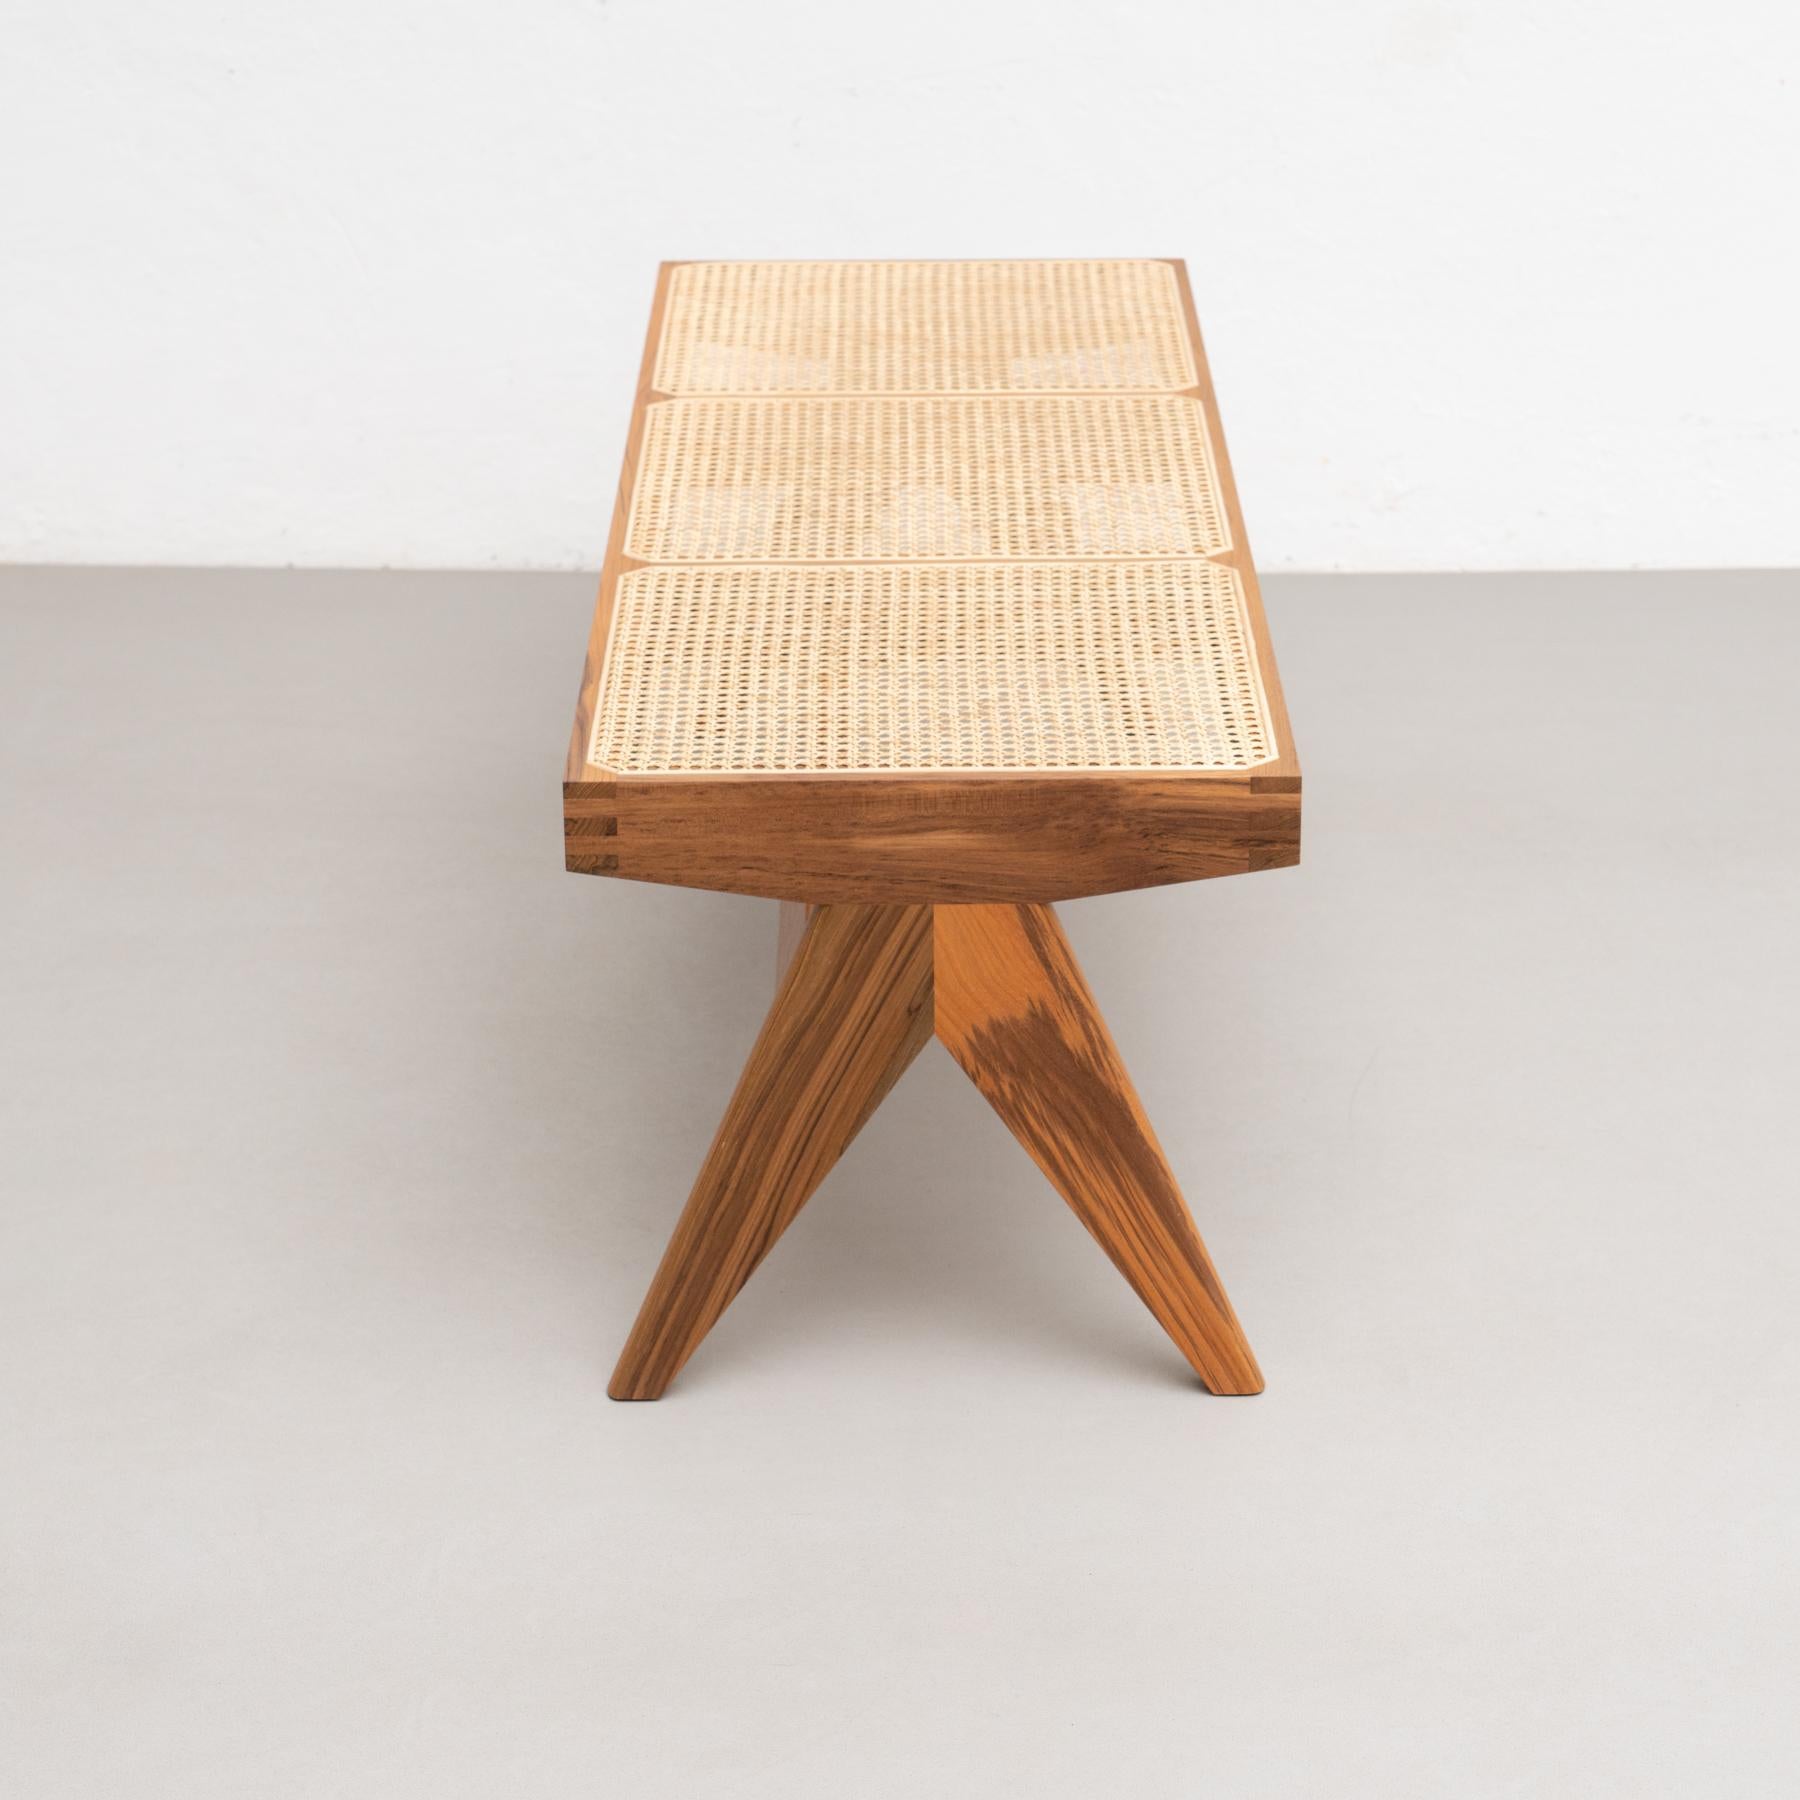 Pierre Jeanneret 057 Civil Bench, Wood and Woven Viennese Cane 9